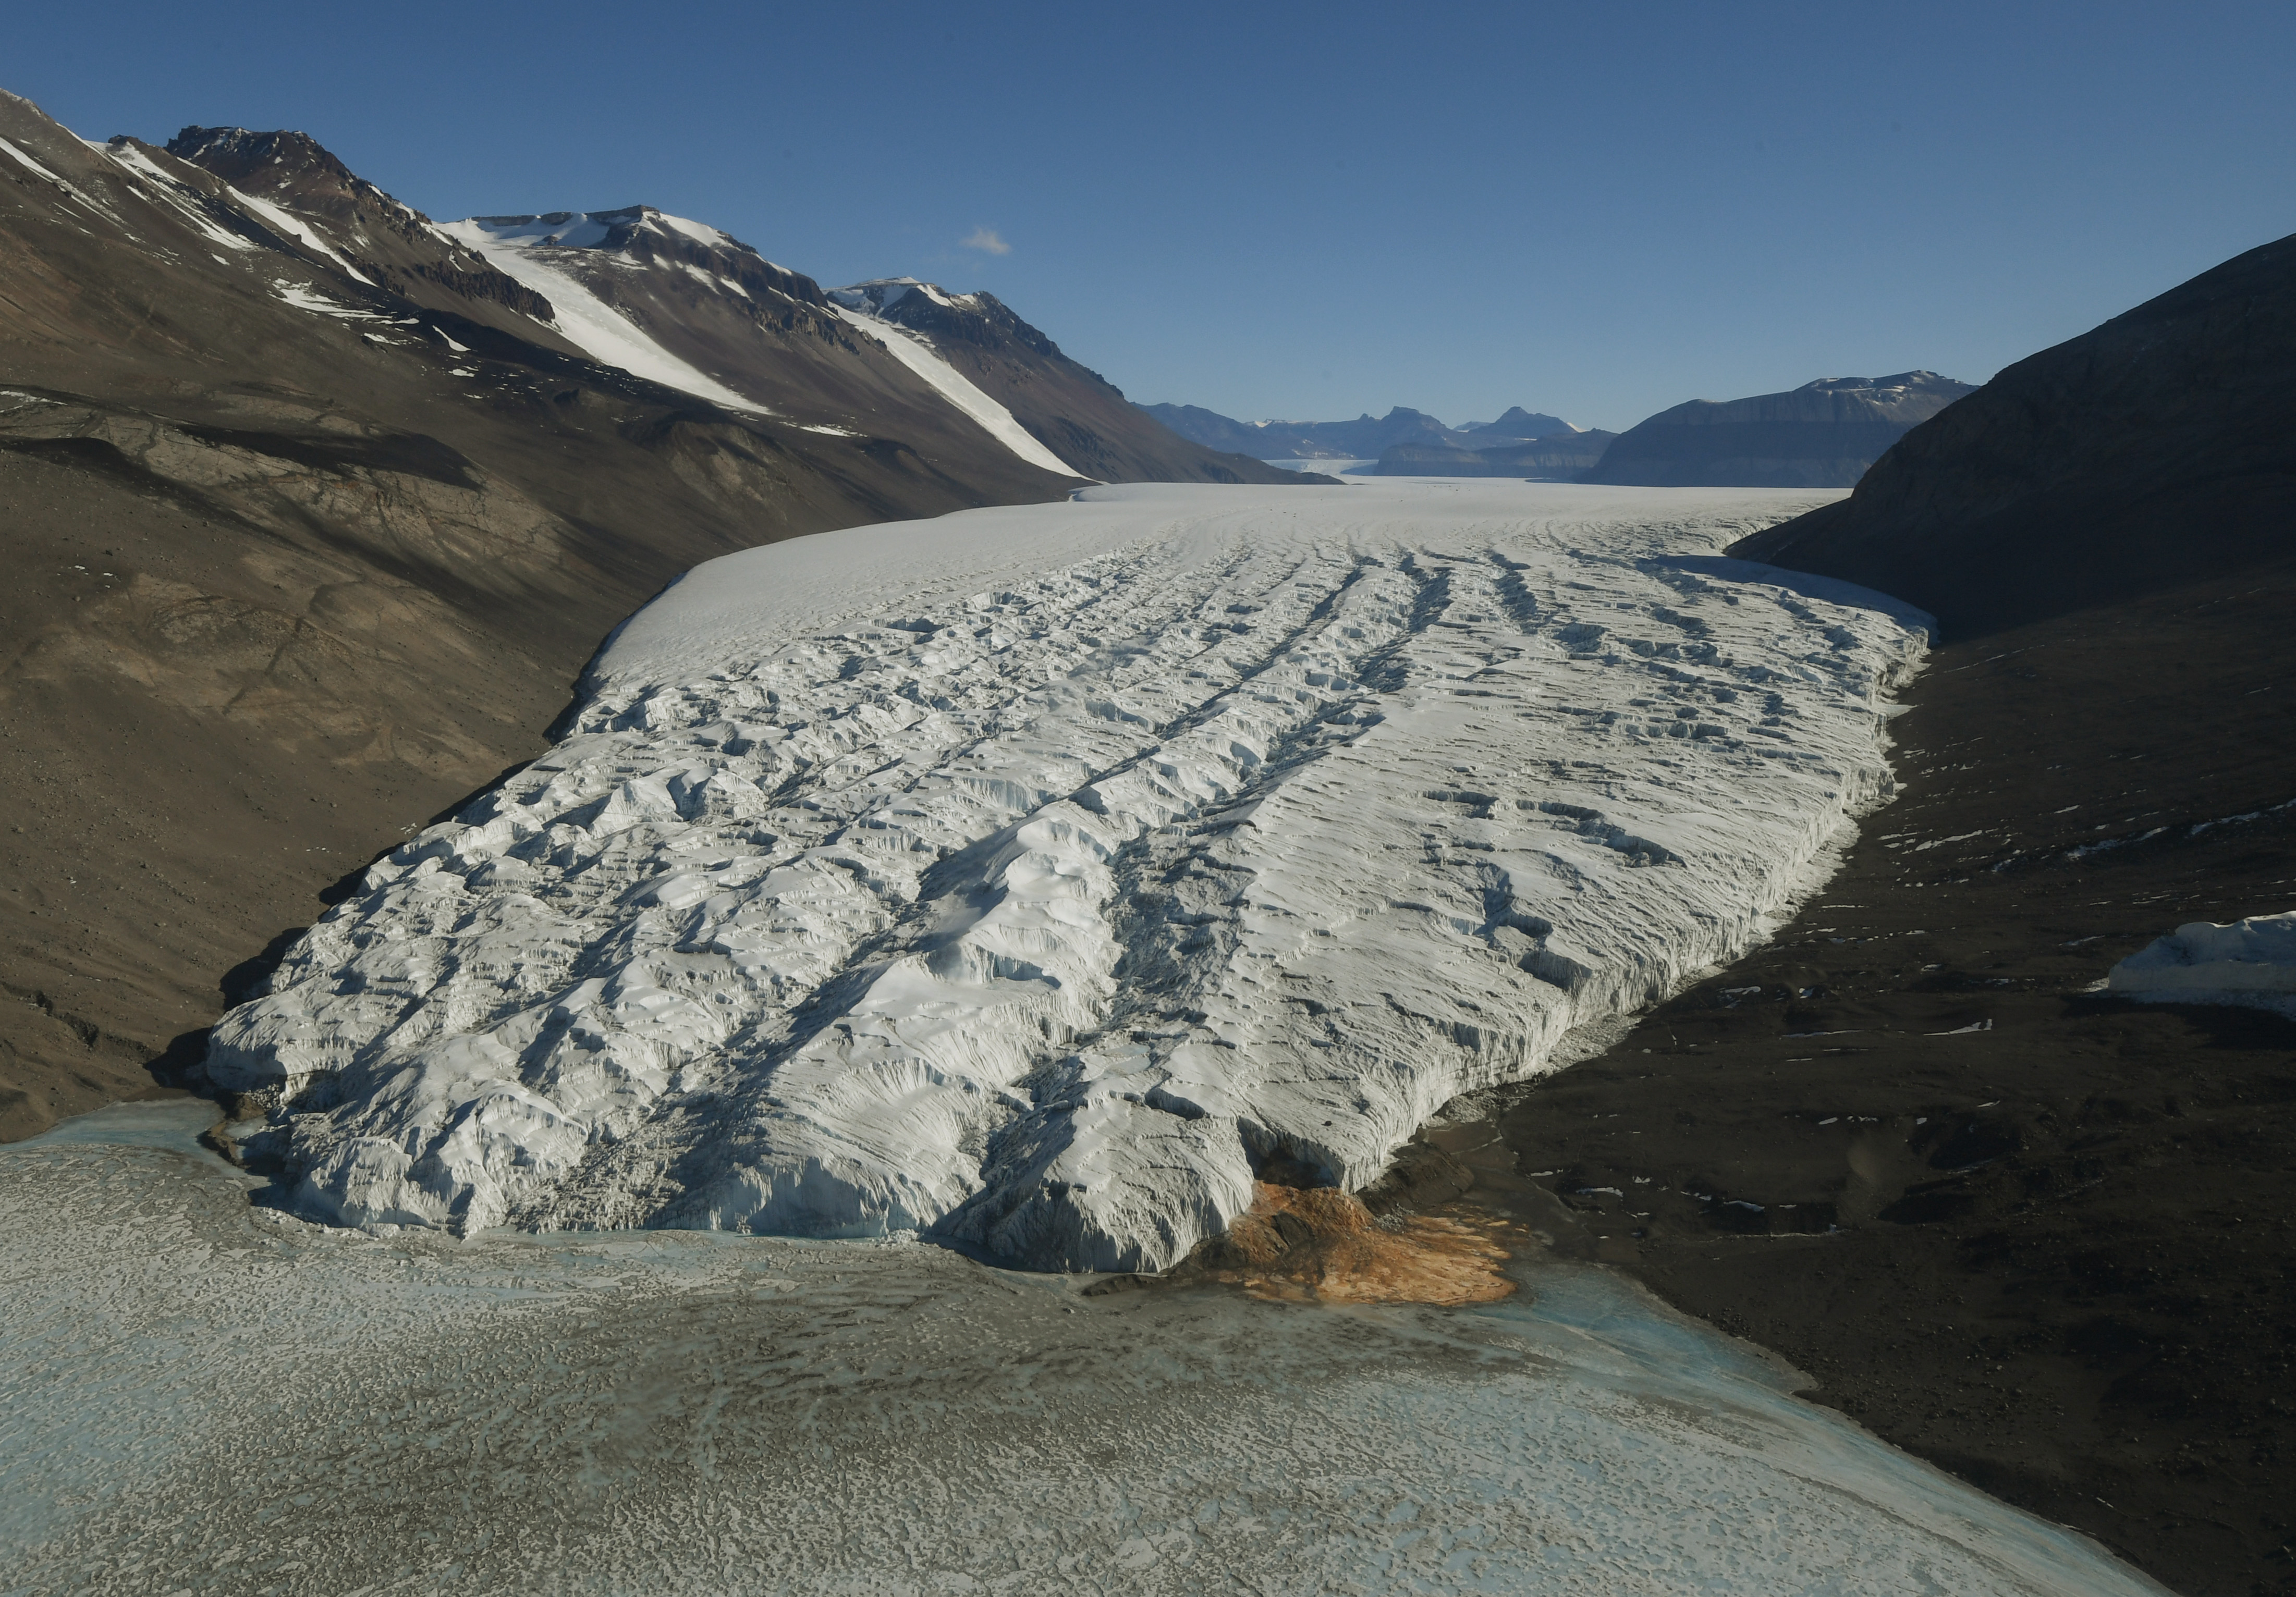 (FILES) This file photo taken on November 11, 2016 shows an aerial view of the Taylor Glacier near McMurdo Station in Antactica. Global warming is responsible for the melting of mountain glaciers around the world in the last century, scientists said December 12, 2016. / AFP PHOTO / POOL / Mark RALSTON